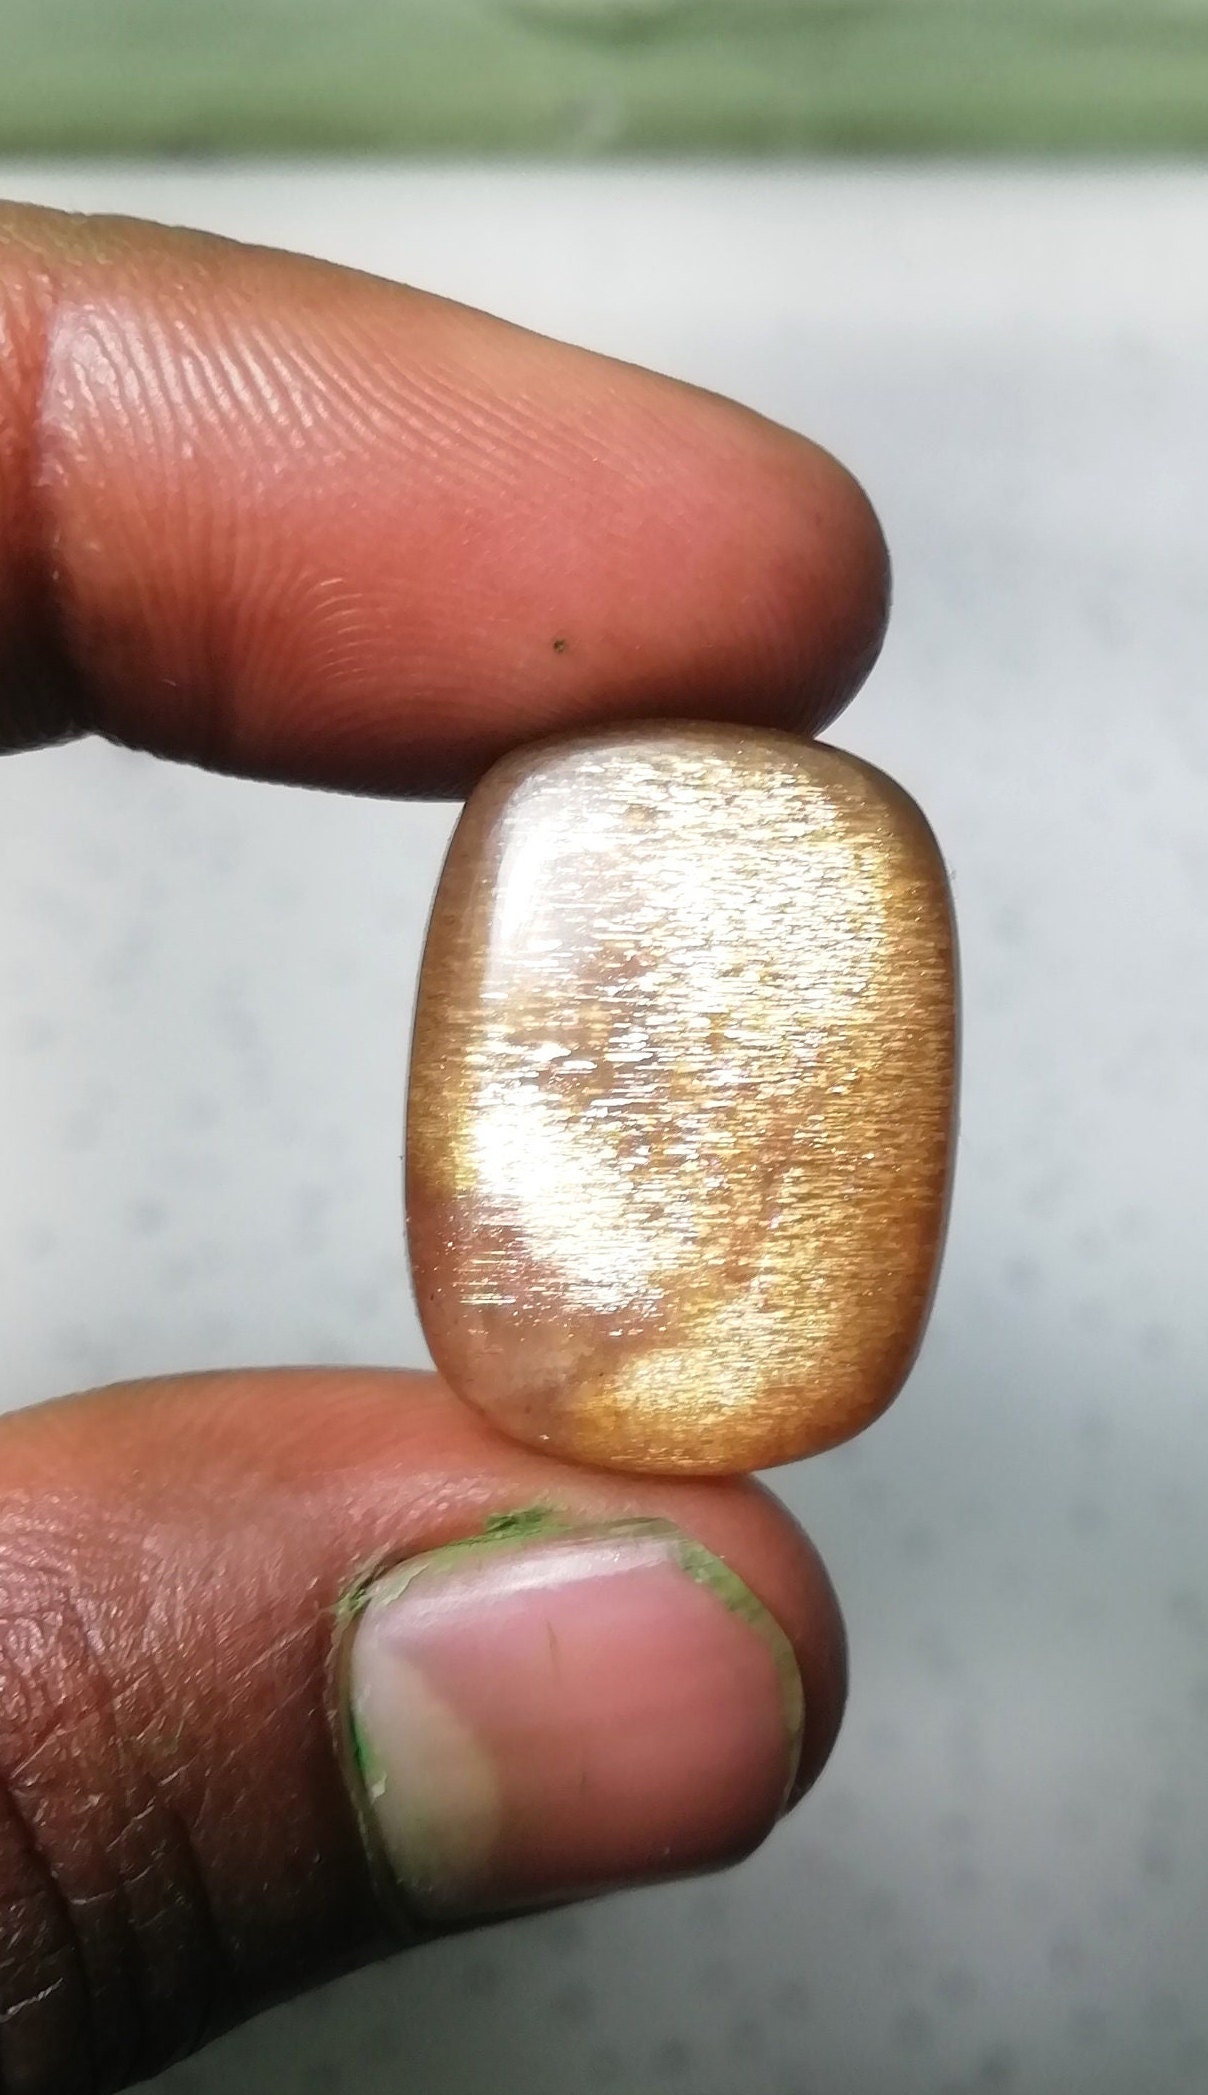 51.35ct Weight Amazing Quality 100% Natural Golden Shine Sunstone Gemstone Loose Cabochon For Jewelry Making